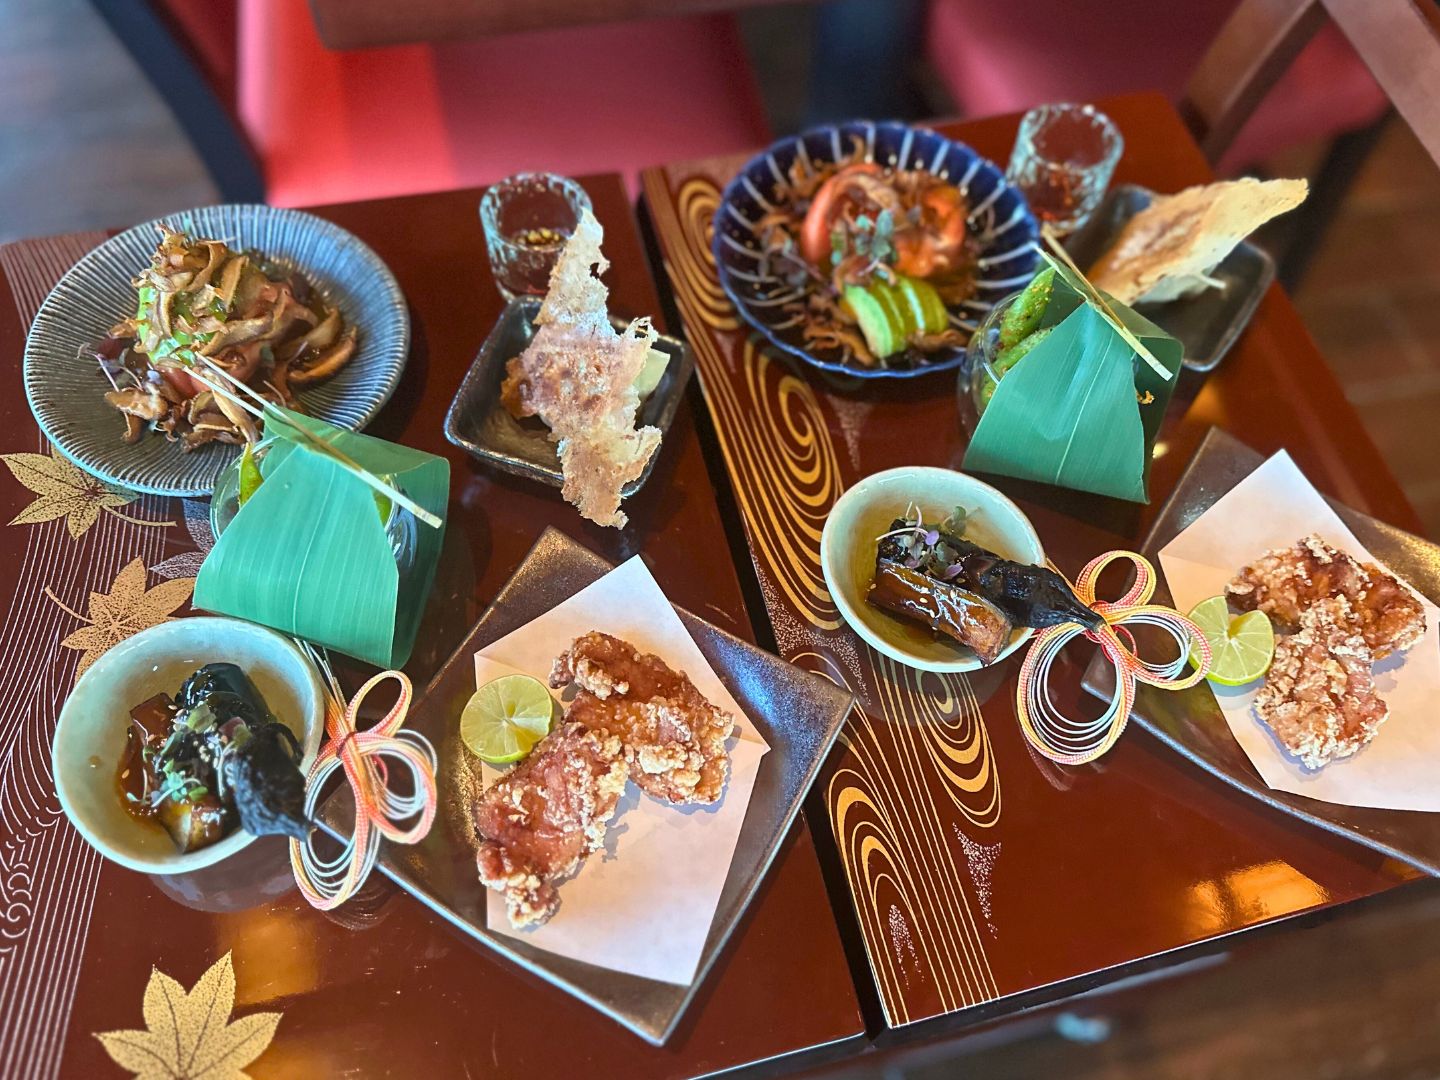 Image of a table full of entrees and side dishes at EPCOT’s Shiki-Sai